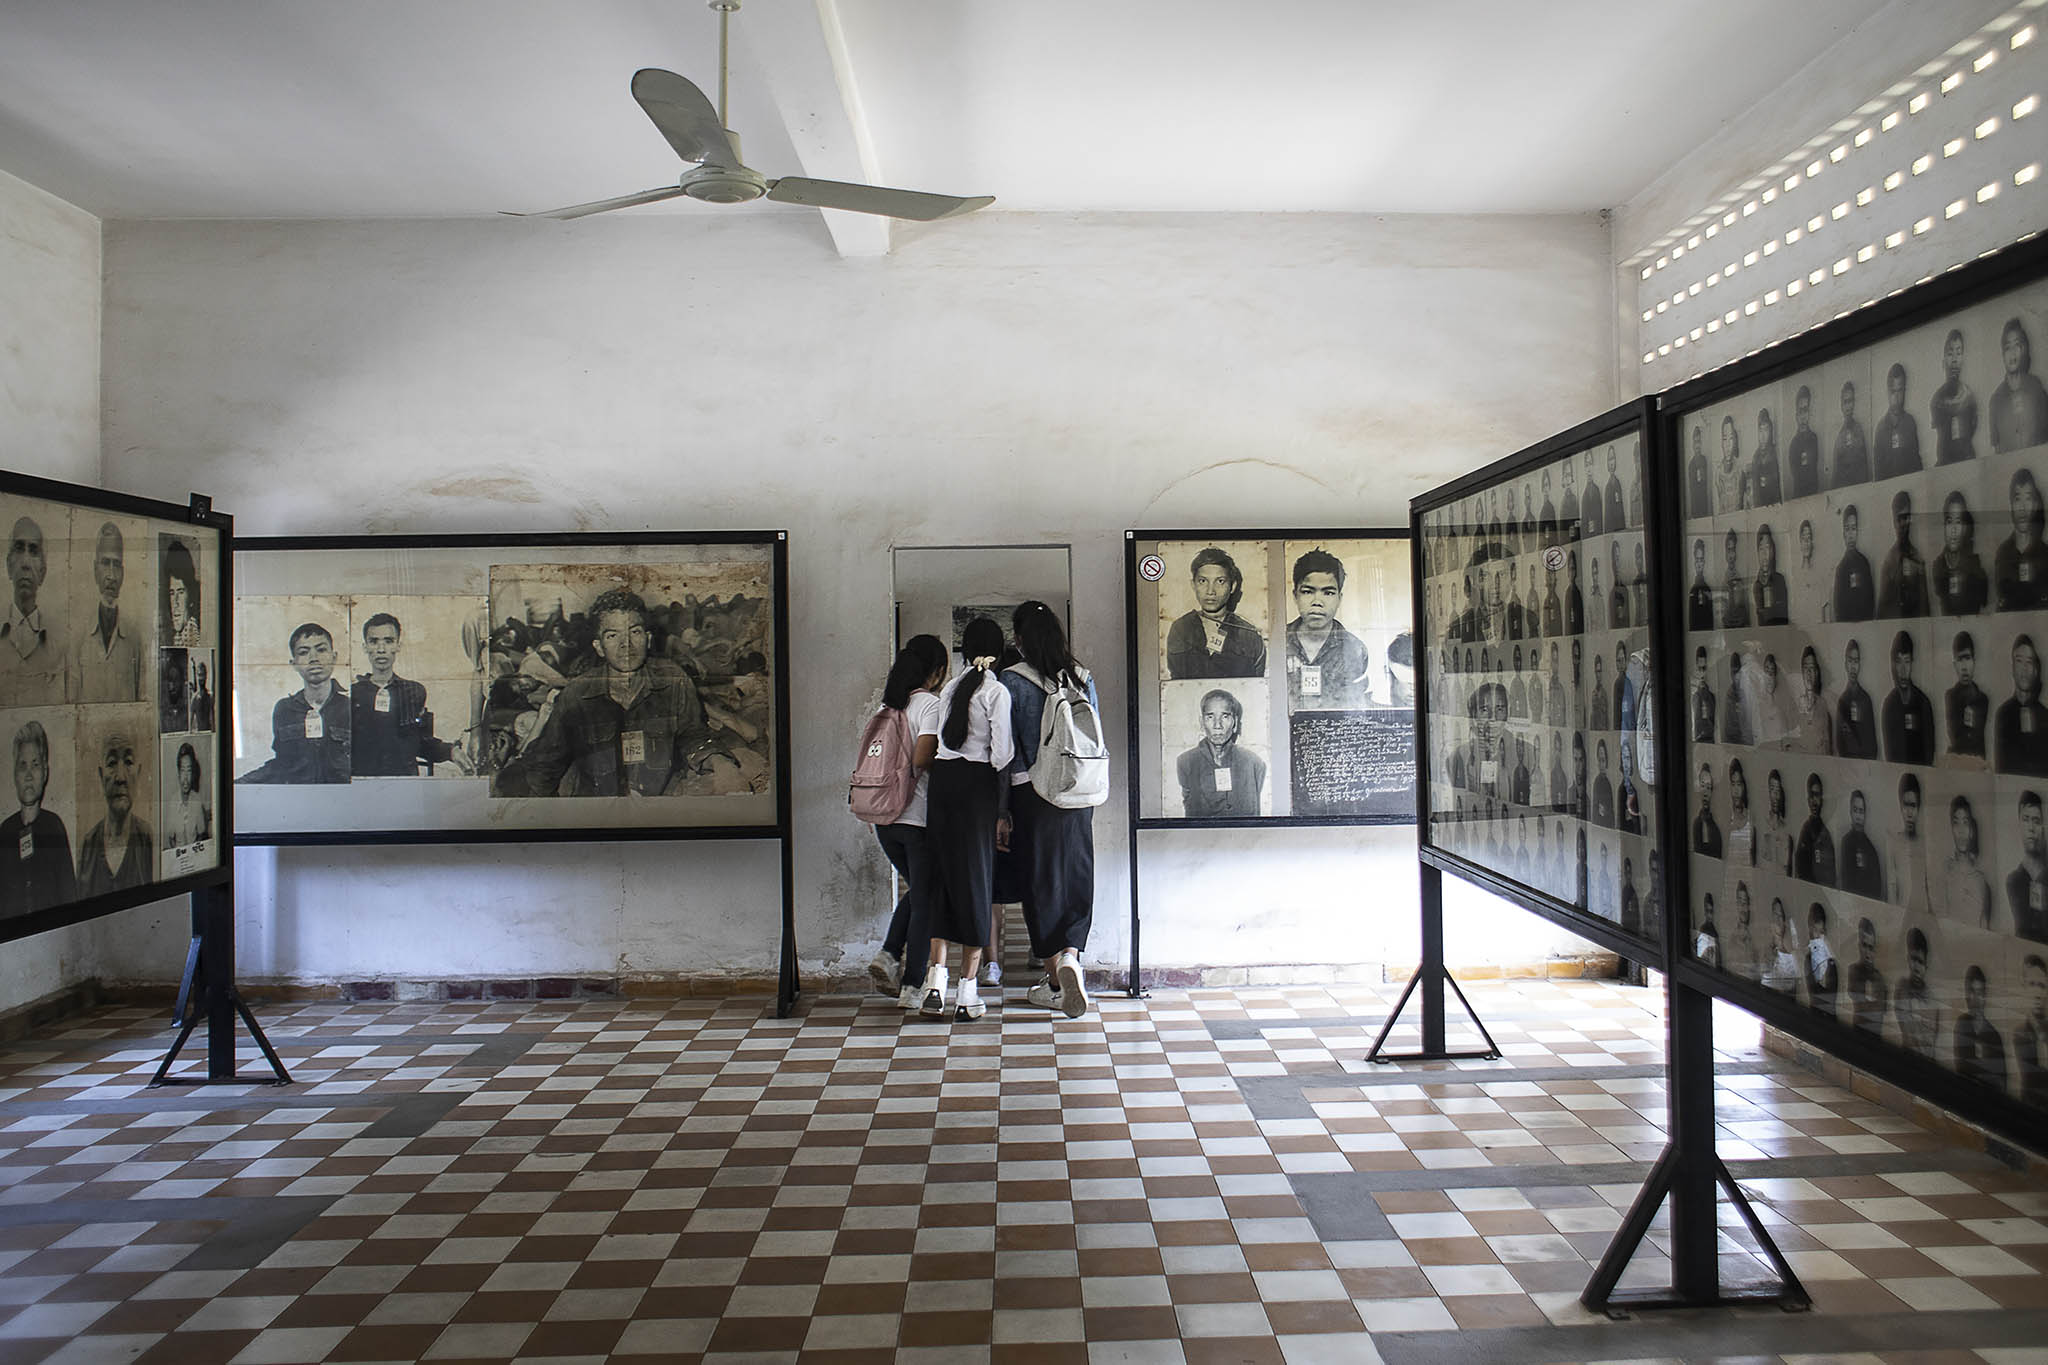 Students make their way through photo displays at the Tuol Sleng Genocide Museum in Phnom Penh, Cambodia, on Saturday, Jan. 22, 2022.. (Nadia Shira Cohen/The New York Times)